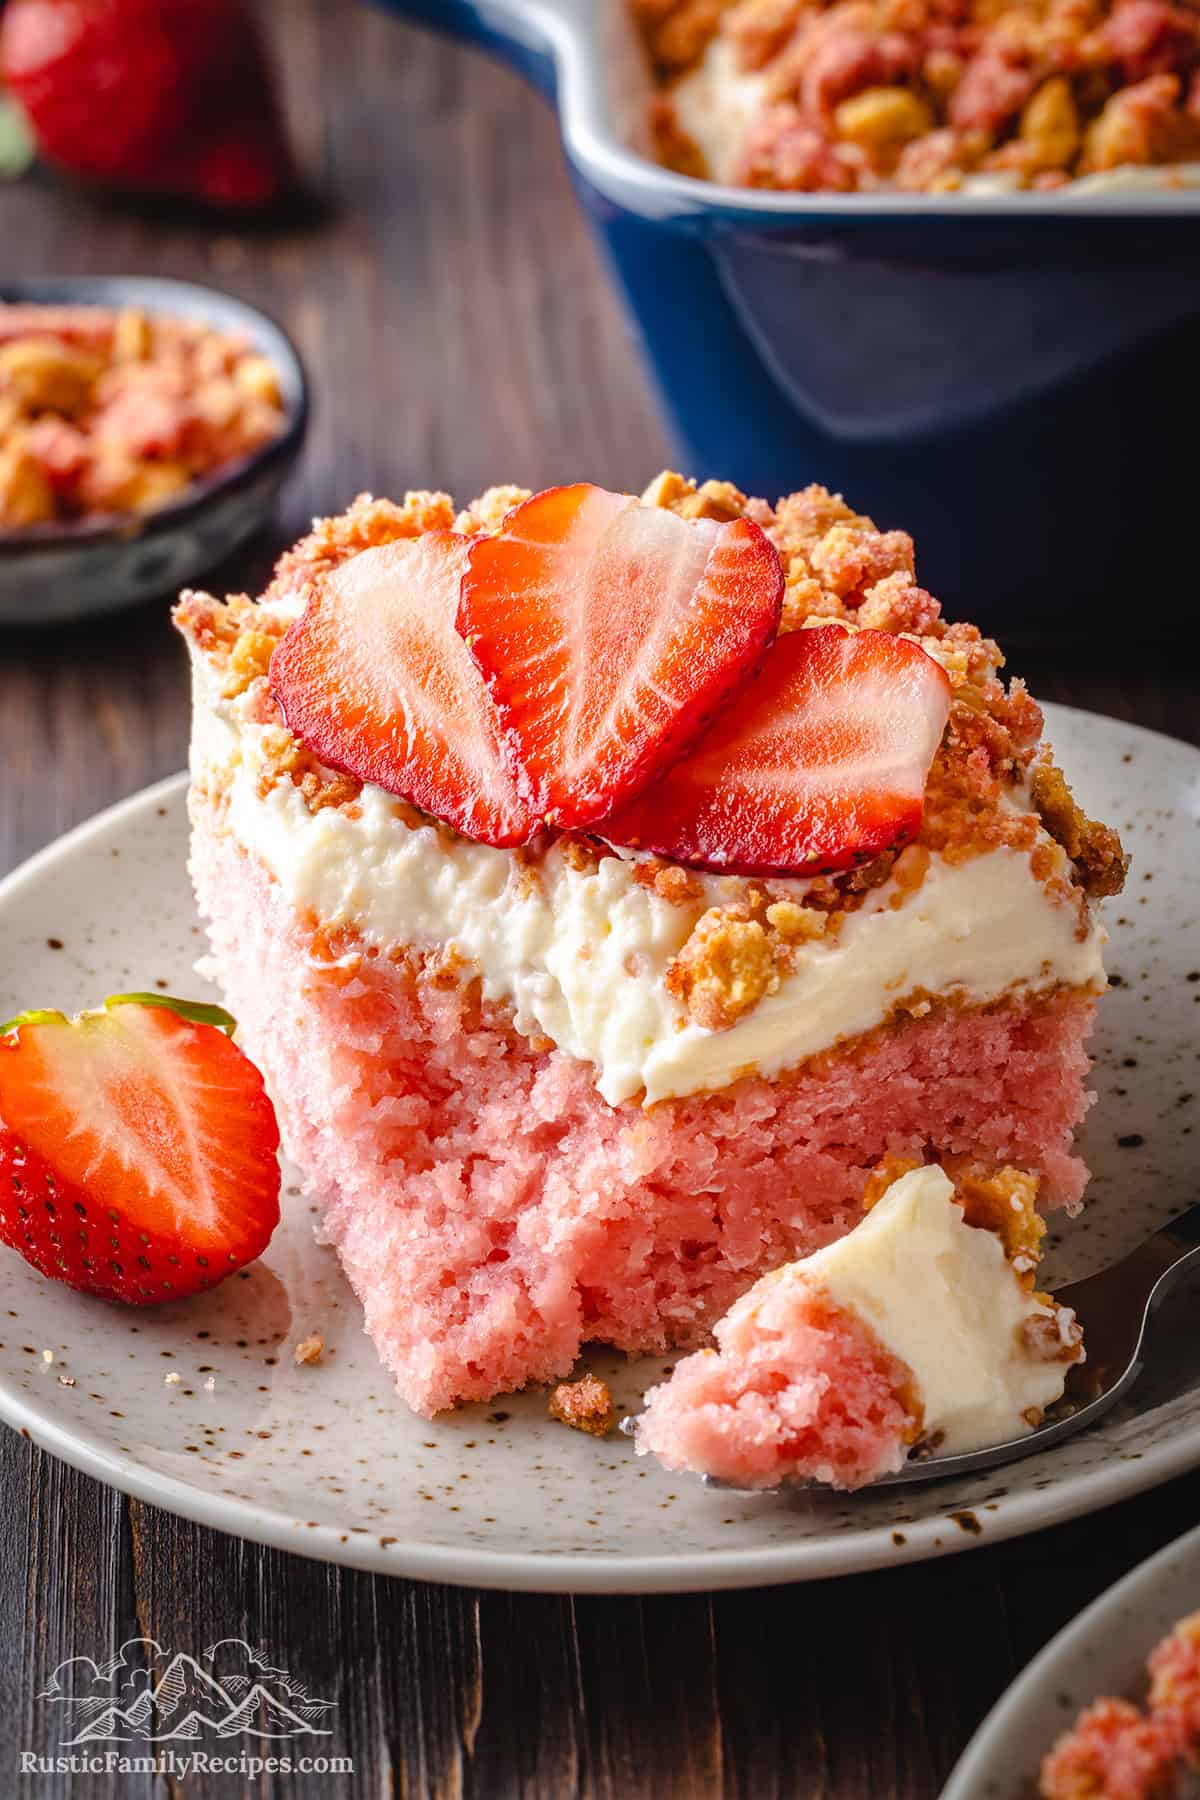 A slice of Strawberry Crunch Cake with a bite taken out.